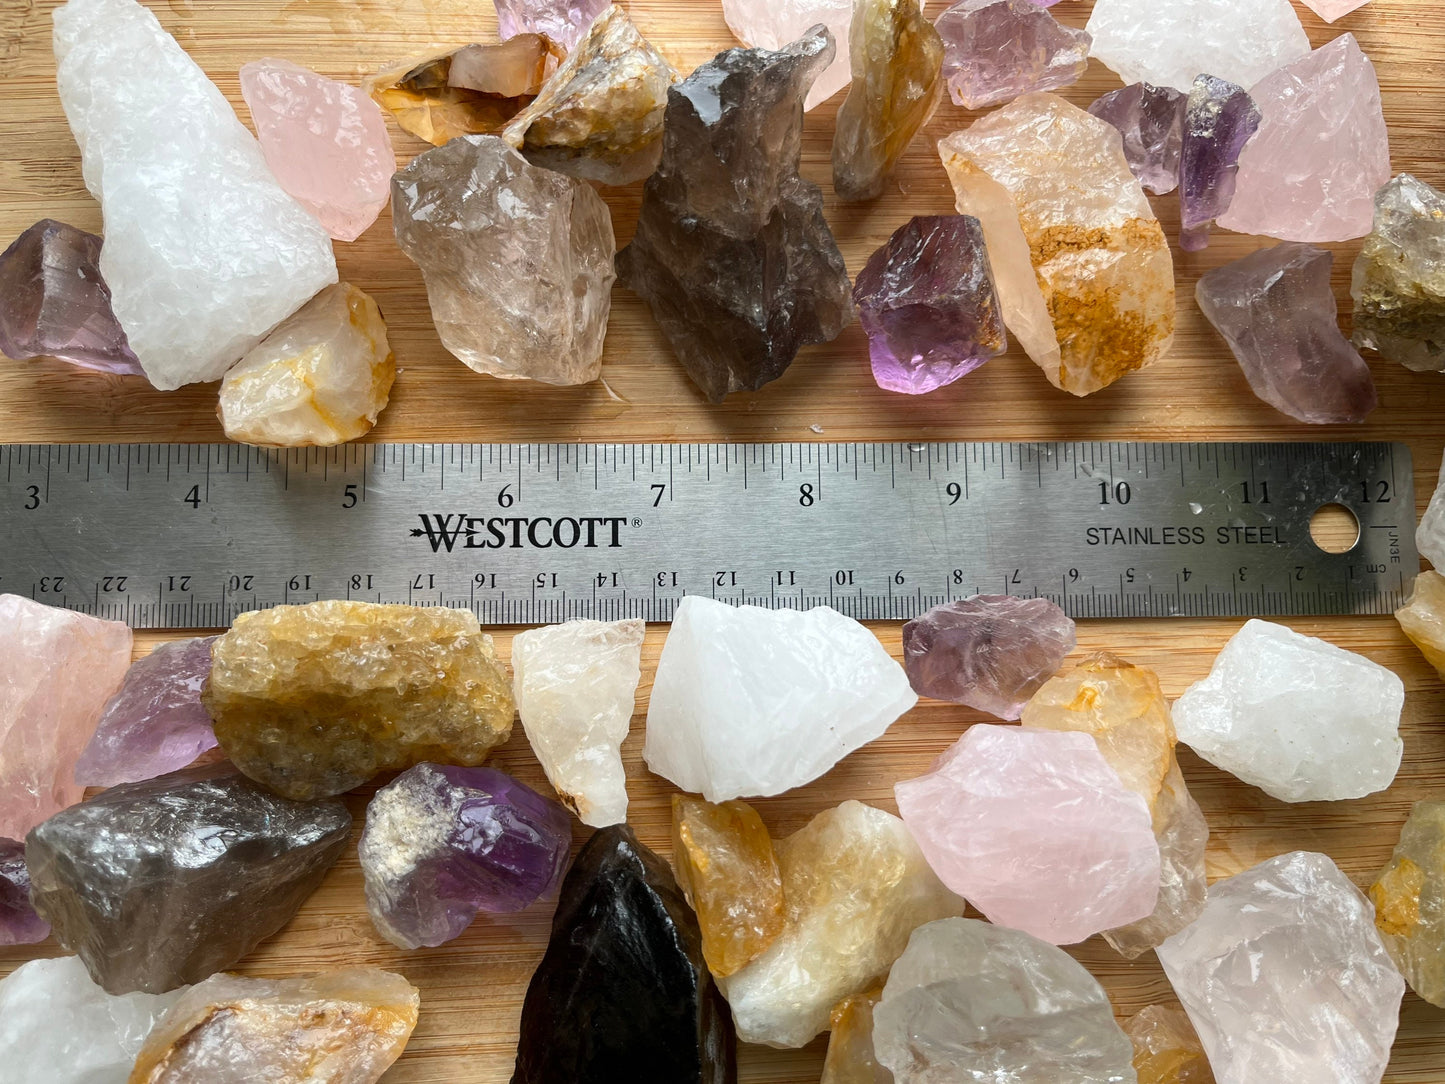 Quartz rough stone mix for tumbling or display, colorful tumbling rough, shipping included